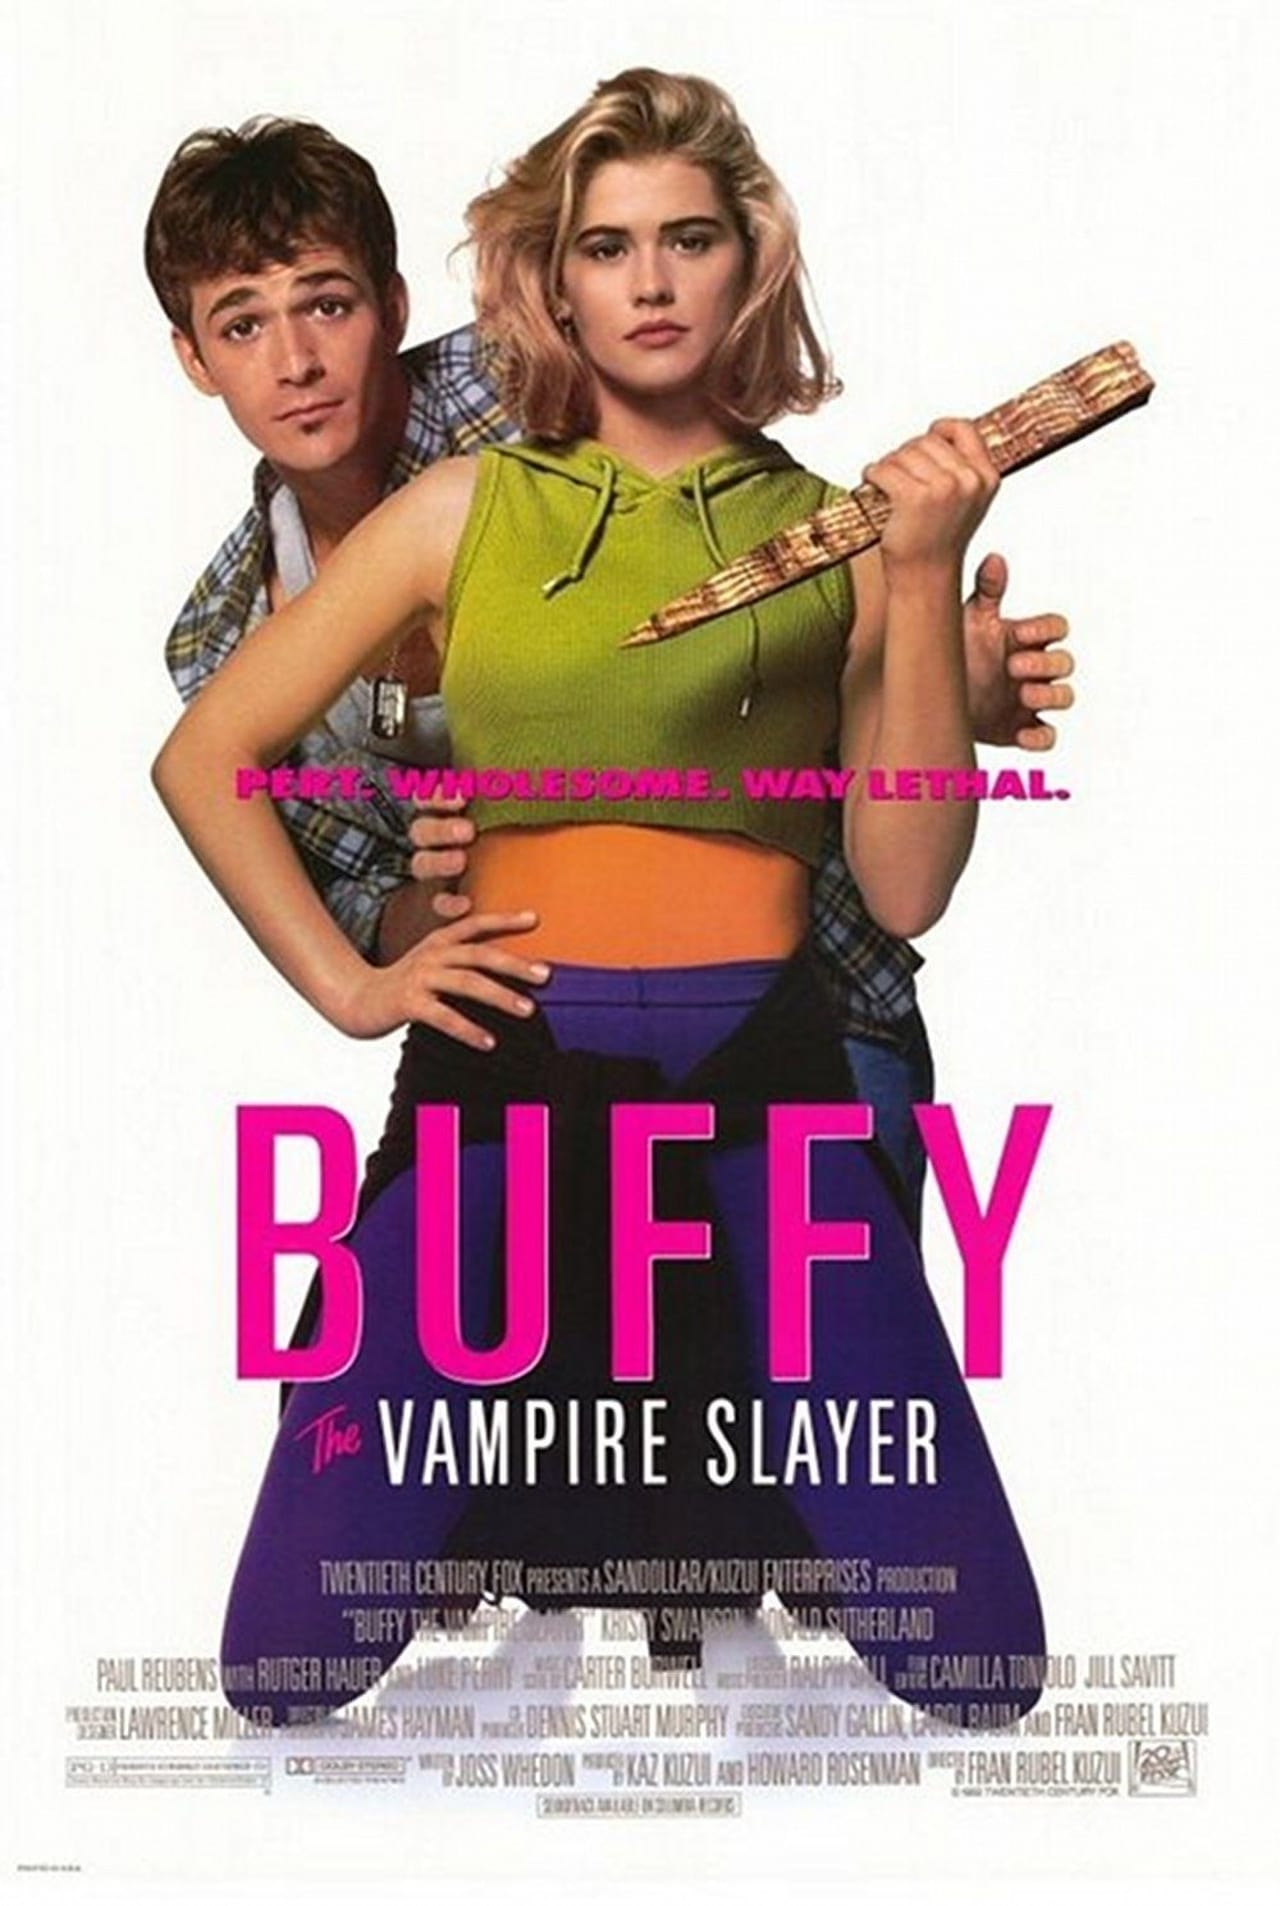 photo of poster for Buffy the Vampire Slayer